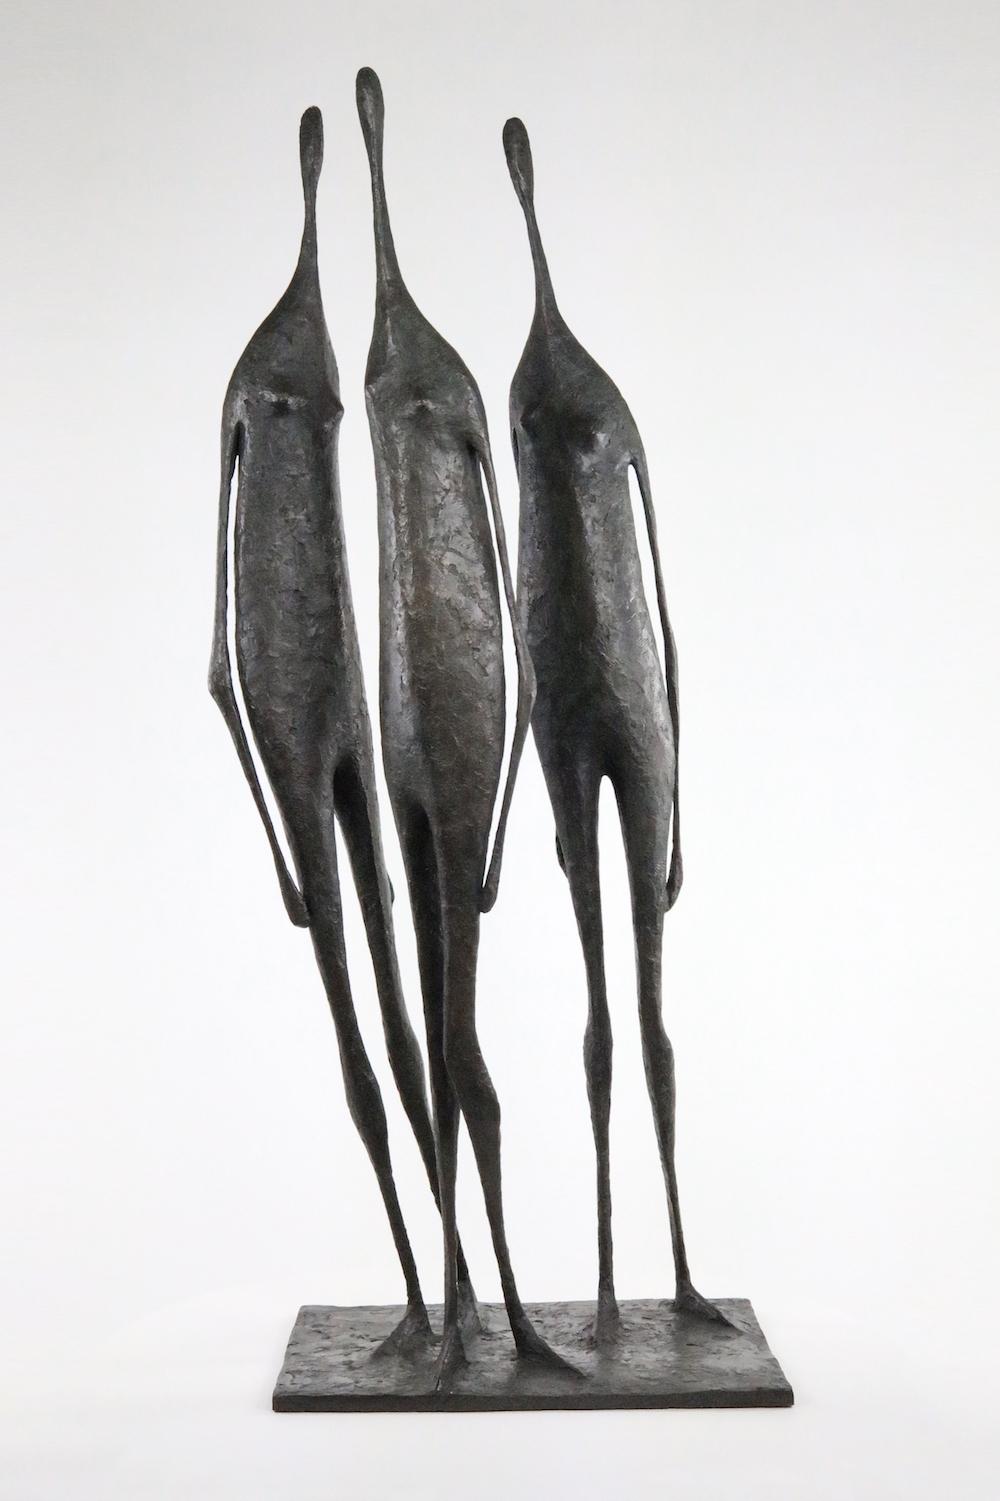 3 Large Standing Figures II is a bronze sculpture by French contemporary artist Pierre Yermia, dimensions are 152 × 70 × 46 cm (59.8 × 27.6 × 18.1 in). 
The sculpture is signed and numbered, it is part of a limited edition of 8 editions + 4 artist’s